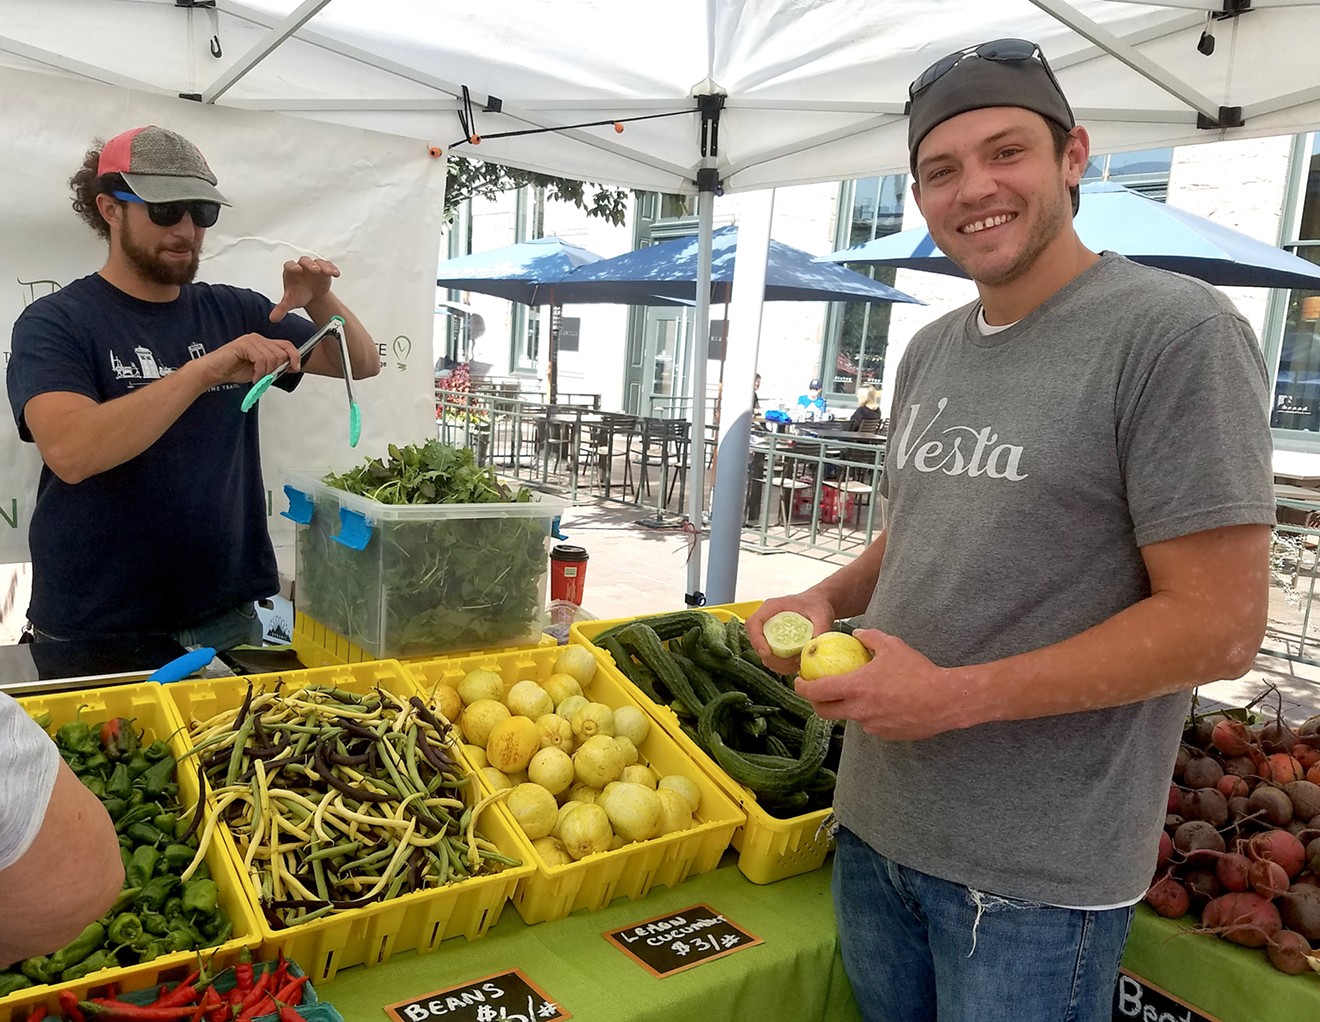 Chef Nick Kayser of Vesta shops at the ACRES at Warren Tech farm stand.